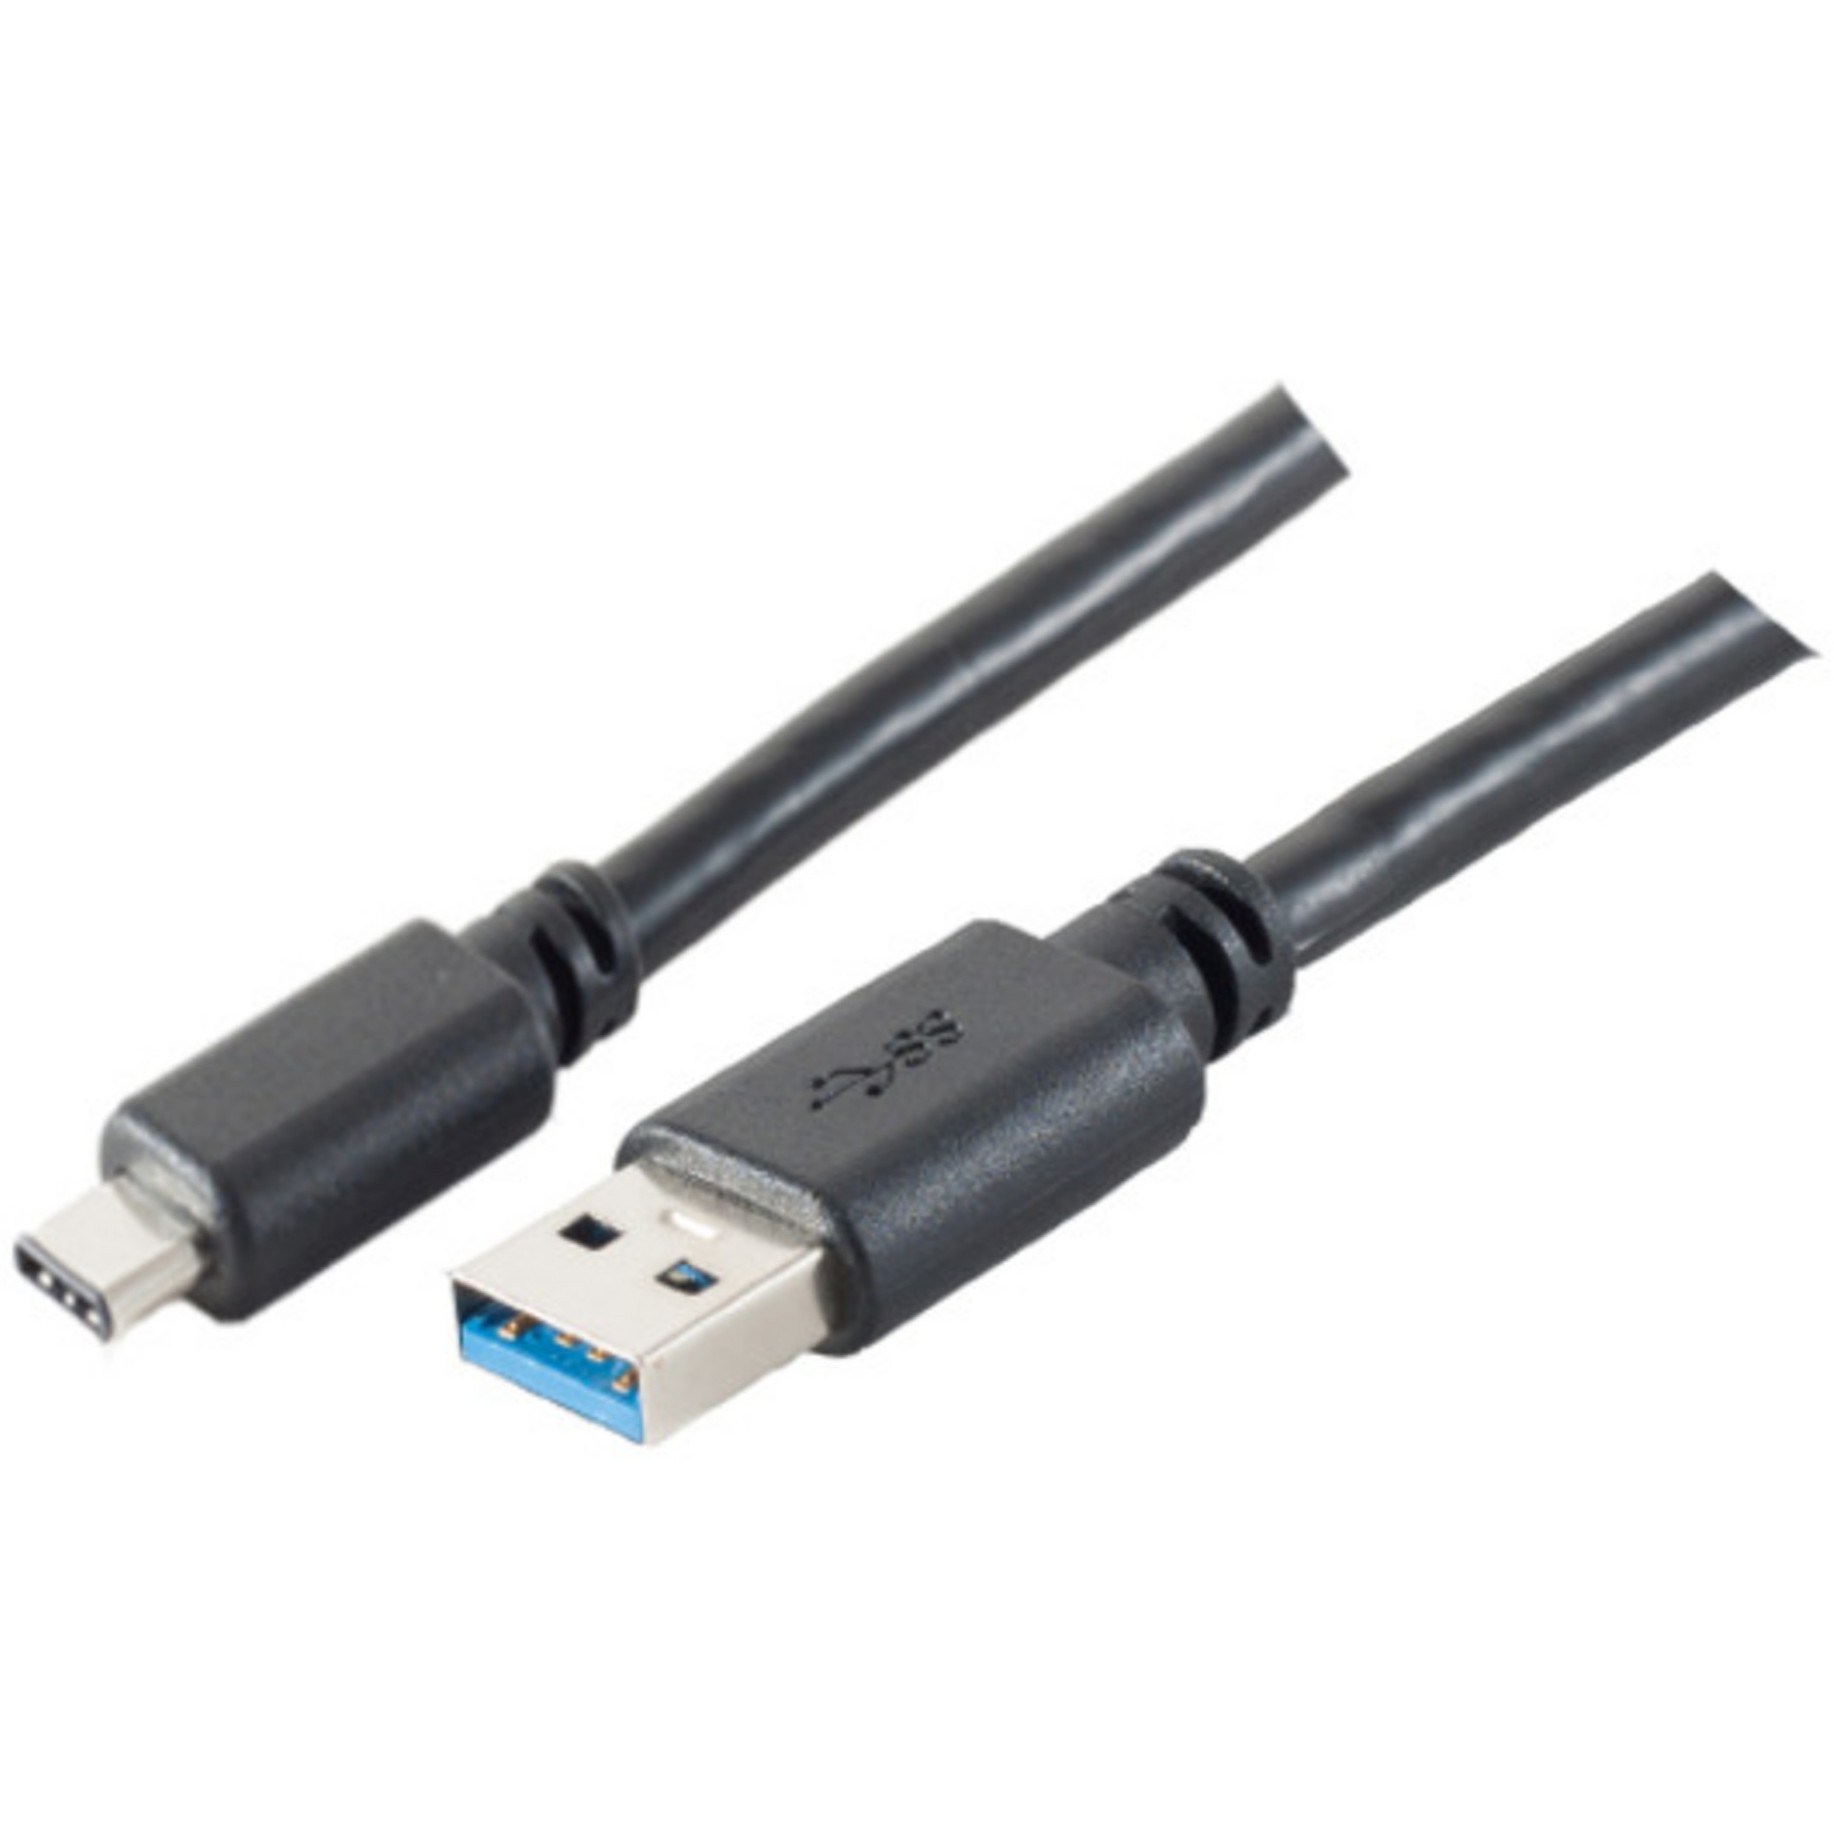 S-Conn 77141-1.8 USB cable - 77141-1.8